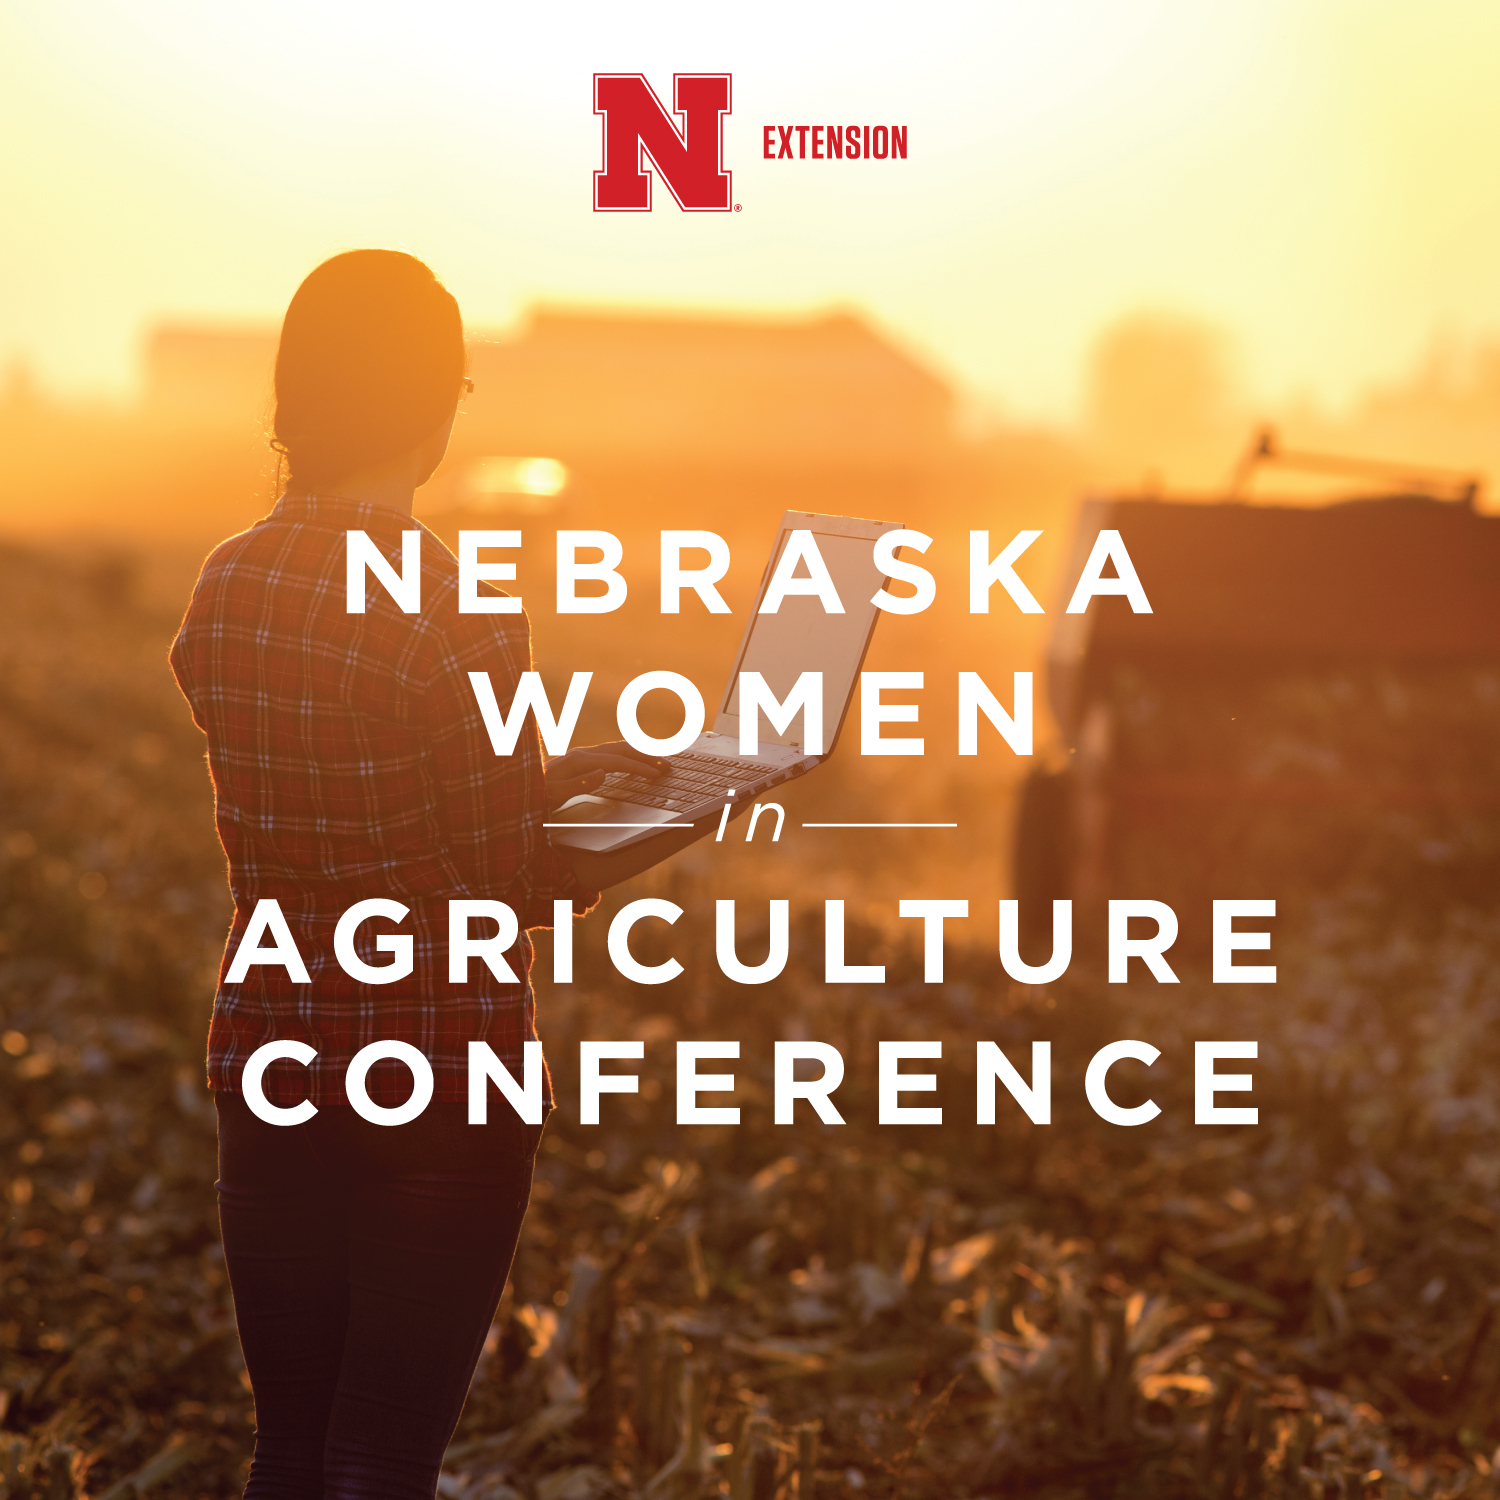 The annual conference will be held Feb. 22 – 23, 2018 at the Holiday Inn Convention Center in Kearney, NE.